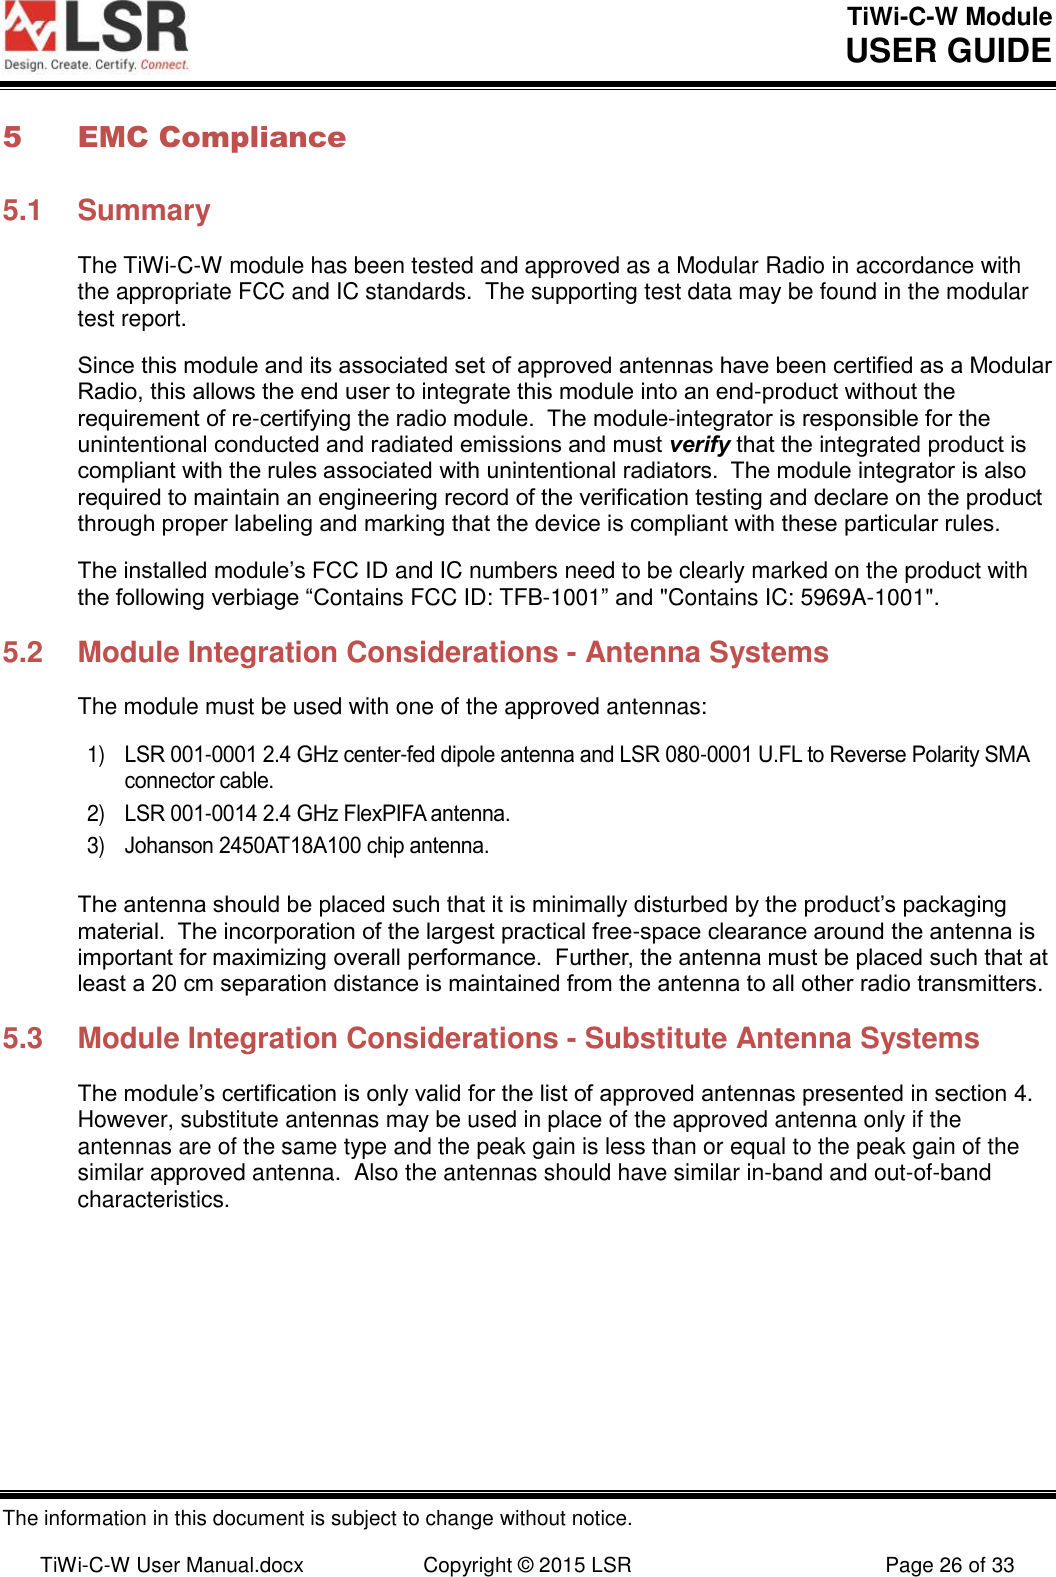 TiWi-C-W Module       USER GUIDE  The information in this document is subject to change without notice.  TiWi-C-W User Manual.docx  Copyright © 2015 LSR  Page 26 of 33 5 EMC Compliance 5.1  Summary The TiWi-C-W module has been tested and approved as a Modular Radio in accordance with the appropriate FCC and IC standards.  The supporting test data may be found in the modular test report. Since this module and its associated set of approved antennas have been certified as a Modular Radio, this allows the end user to integrate this module into an end-product without the requirement of re-certifying the radio module.  The module-integrator is responsible for the unintentional conducted and radiated emissions and must verify that the integrated product is compliant with the rules associated with unintentional radiators.  The module integrator is also required to maintain an engineering record of the verification testing and declare on the product through proper labeling and marking that the device is compliant with these particular rules.   The installed module’s FCC ID and IC numbers need to be clearly marked on the product with the following verbiage “Contains FCC ID: TFB-1001” and &quot;Contains IC: 5969A-1001&quot;. 5.2  Module Integration Considerations - Antenna Systems The module must be used with one of the approved antennas:  1) LSR 001-0001 2.4 GHz center-fed dipole antenna and LSR 080-0001 U.FL to Reverse Polarity SMA connector cable. 2) LSR 001-0014 2.4 GHz FlexPIFA antenna. 3) Johanson 2450AT18A100 chip antenna.  The antenna should be placed such that it is minimally disturbed by the product’s packaging material.  The incorporation of the largest practical free-space clearance around the antenna is important for maximizing overall performance.  Further, the antenna must be placed such that at least a 20 cm separation distance is maintained from the antenna to all other radio transmitters.  5.3  Module Integration Considerations - Substitute Antenna Systems The module’s certification is only valid for the list of approved antennas presented in section 4.  However, substitute antennas may be used in place of the approved antenna only if the antennas are of the same type and the peak gain is less than or equal to the peak gain of the similar approved antenna.  Also the antennas should have similar in-band and out-of-band characteristics.   